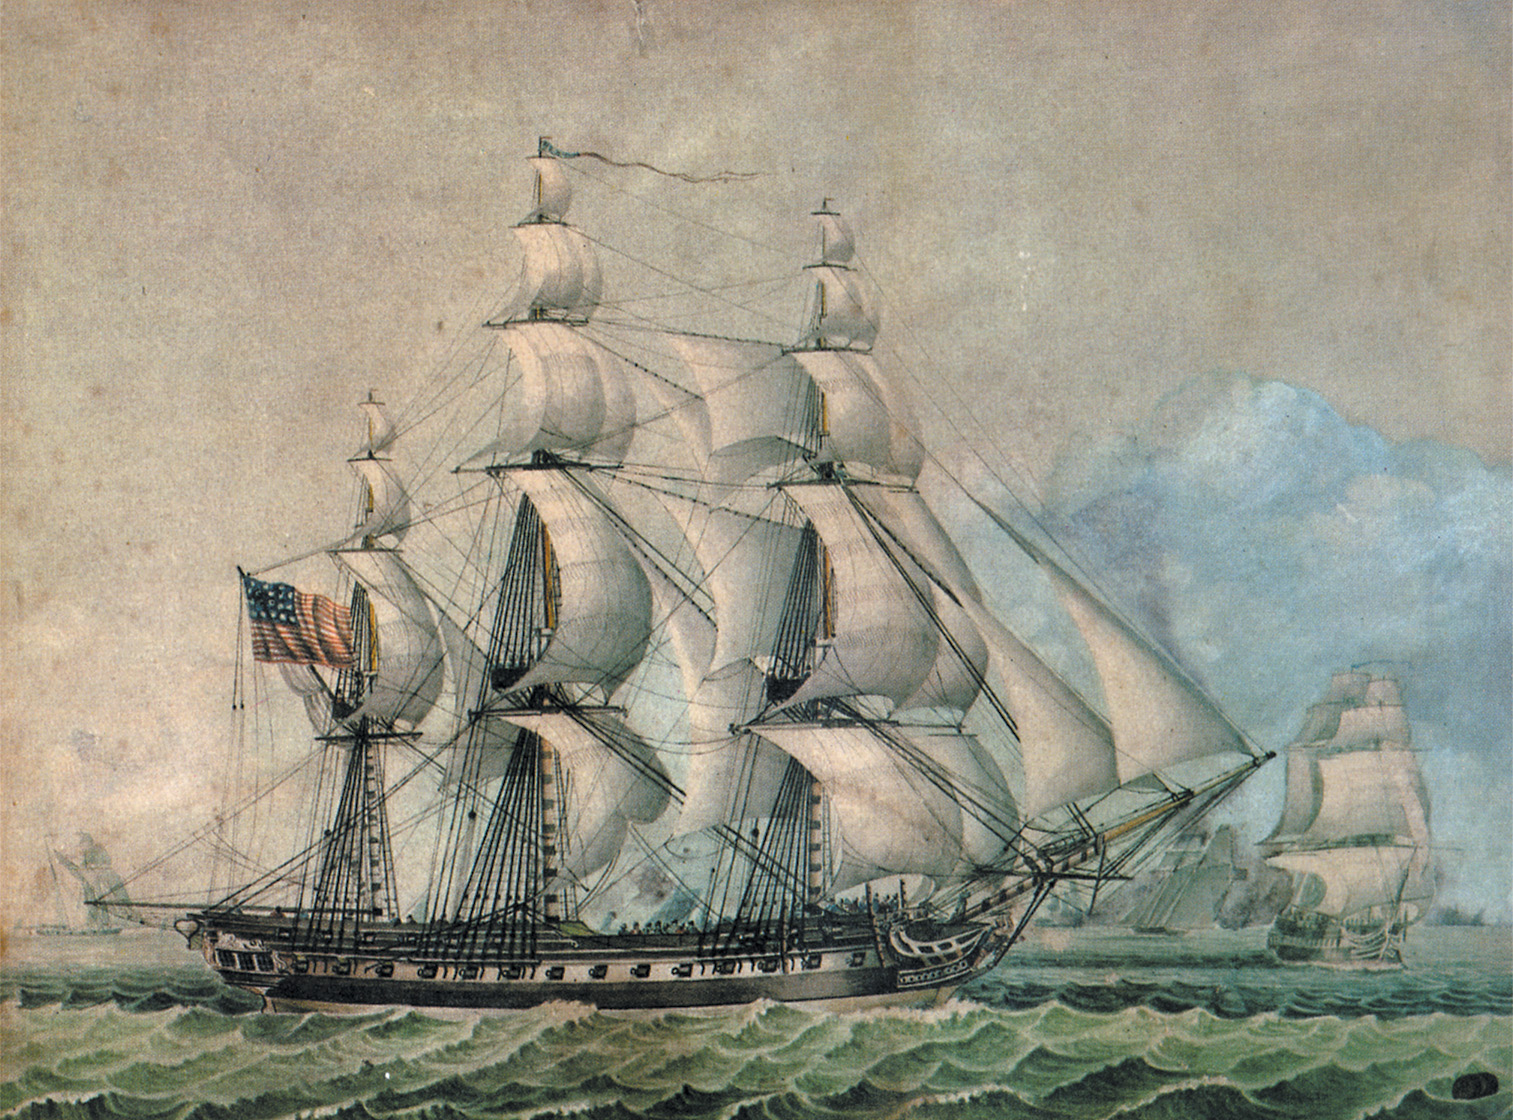 The frigate USS Philadelphia cuts through the sea at full sail shortly before its capture by Tripolitan corsairs. Her seizure by pirates was the catalyst for Eaton’s punitive expedition.